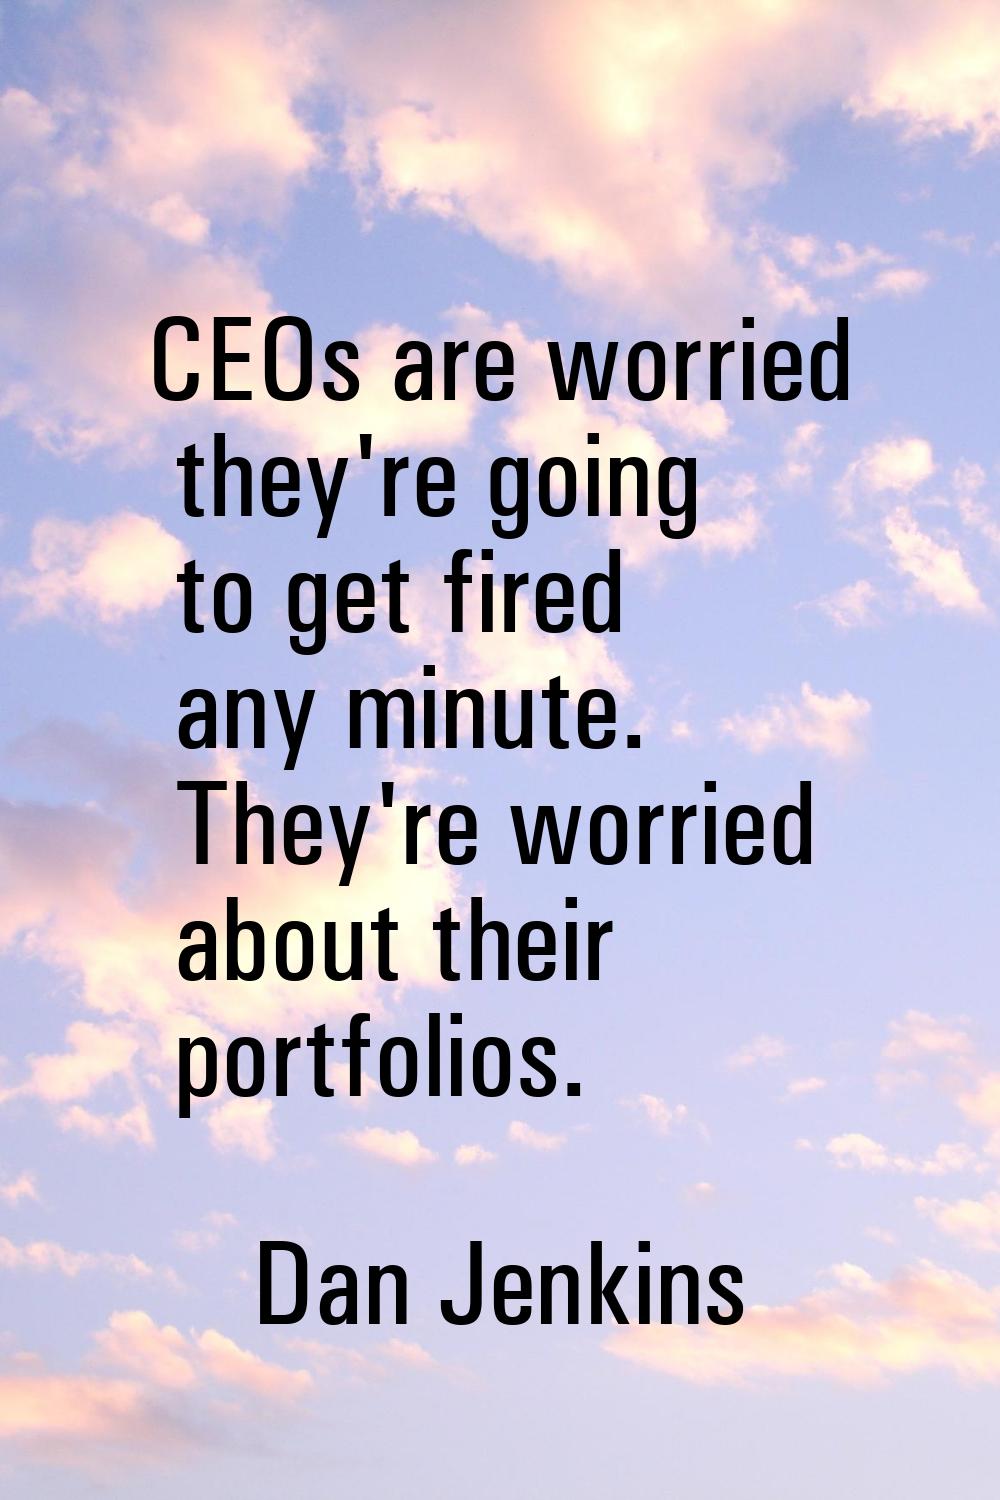 CEOs are worried they're going to get fired any minute. They're worried about their portfolios.